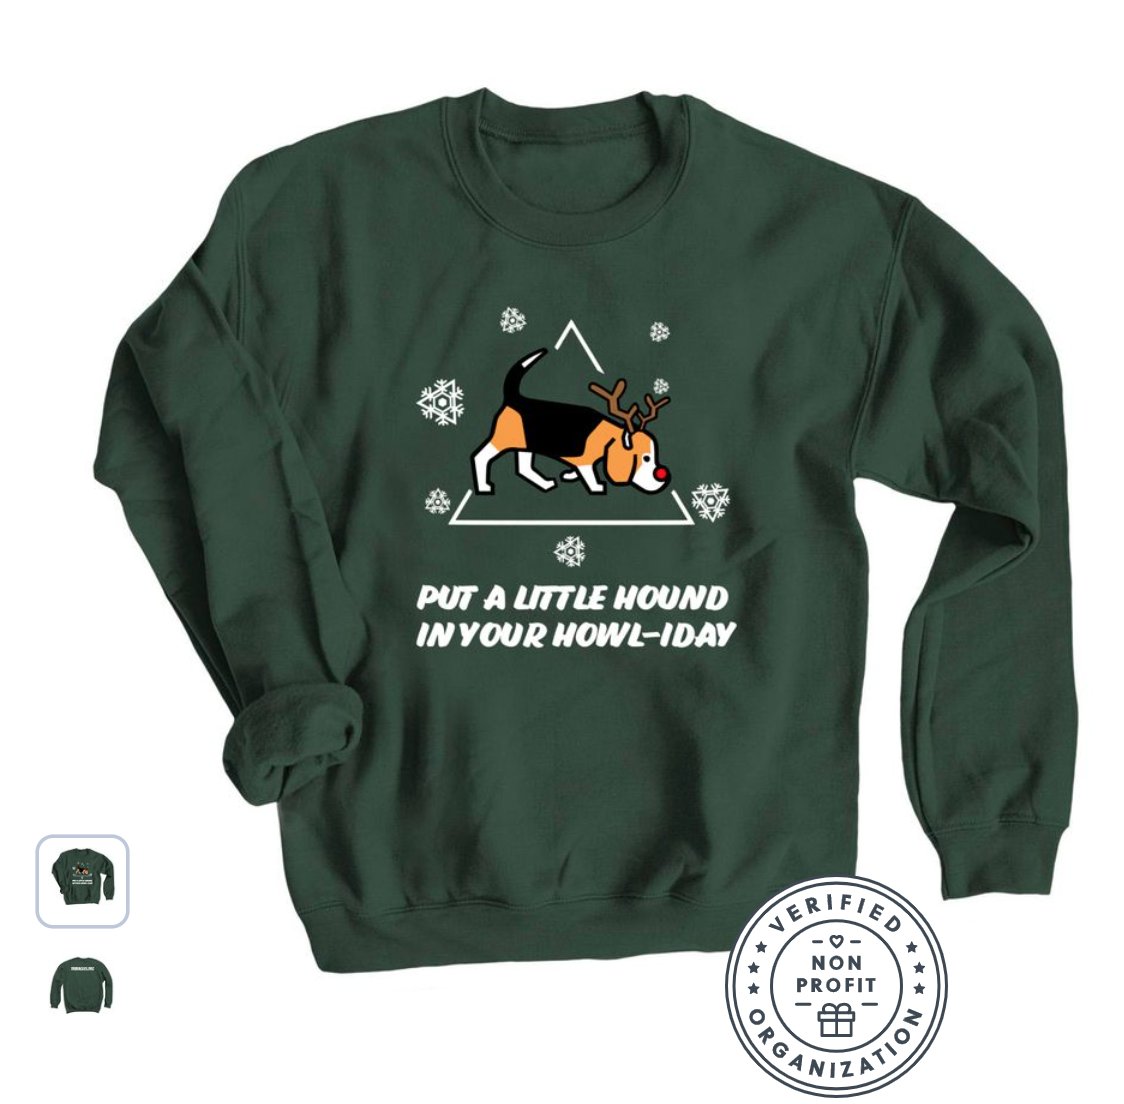 Put a little hound in your howl-iday! Buy a sweatshirt and support the beagles! bonfire.com/put-a-little-h…